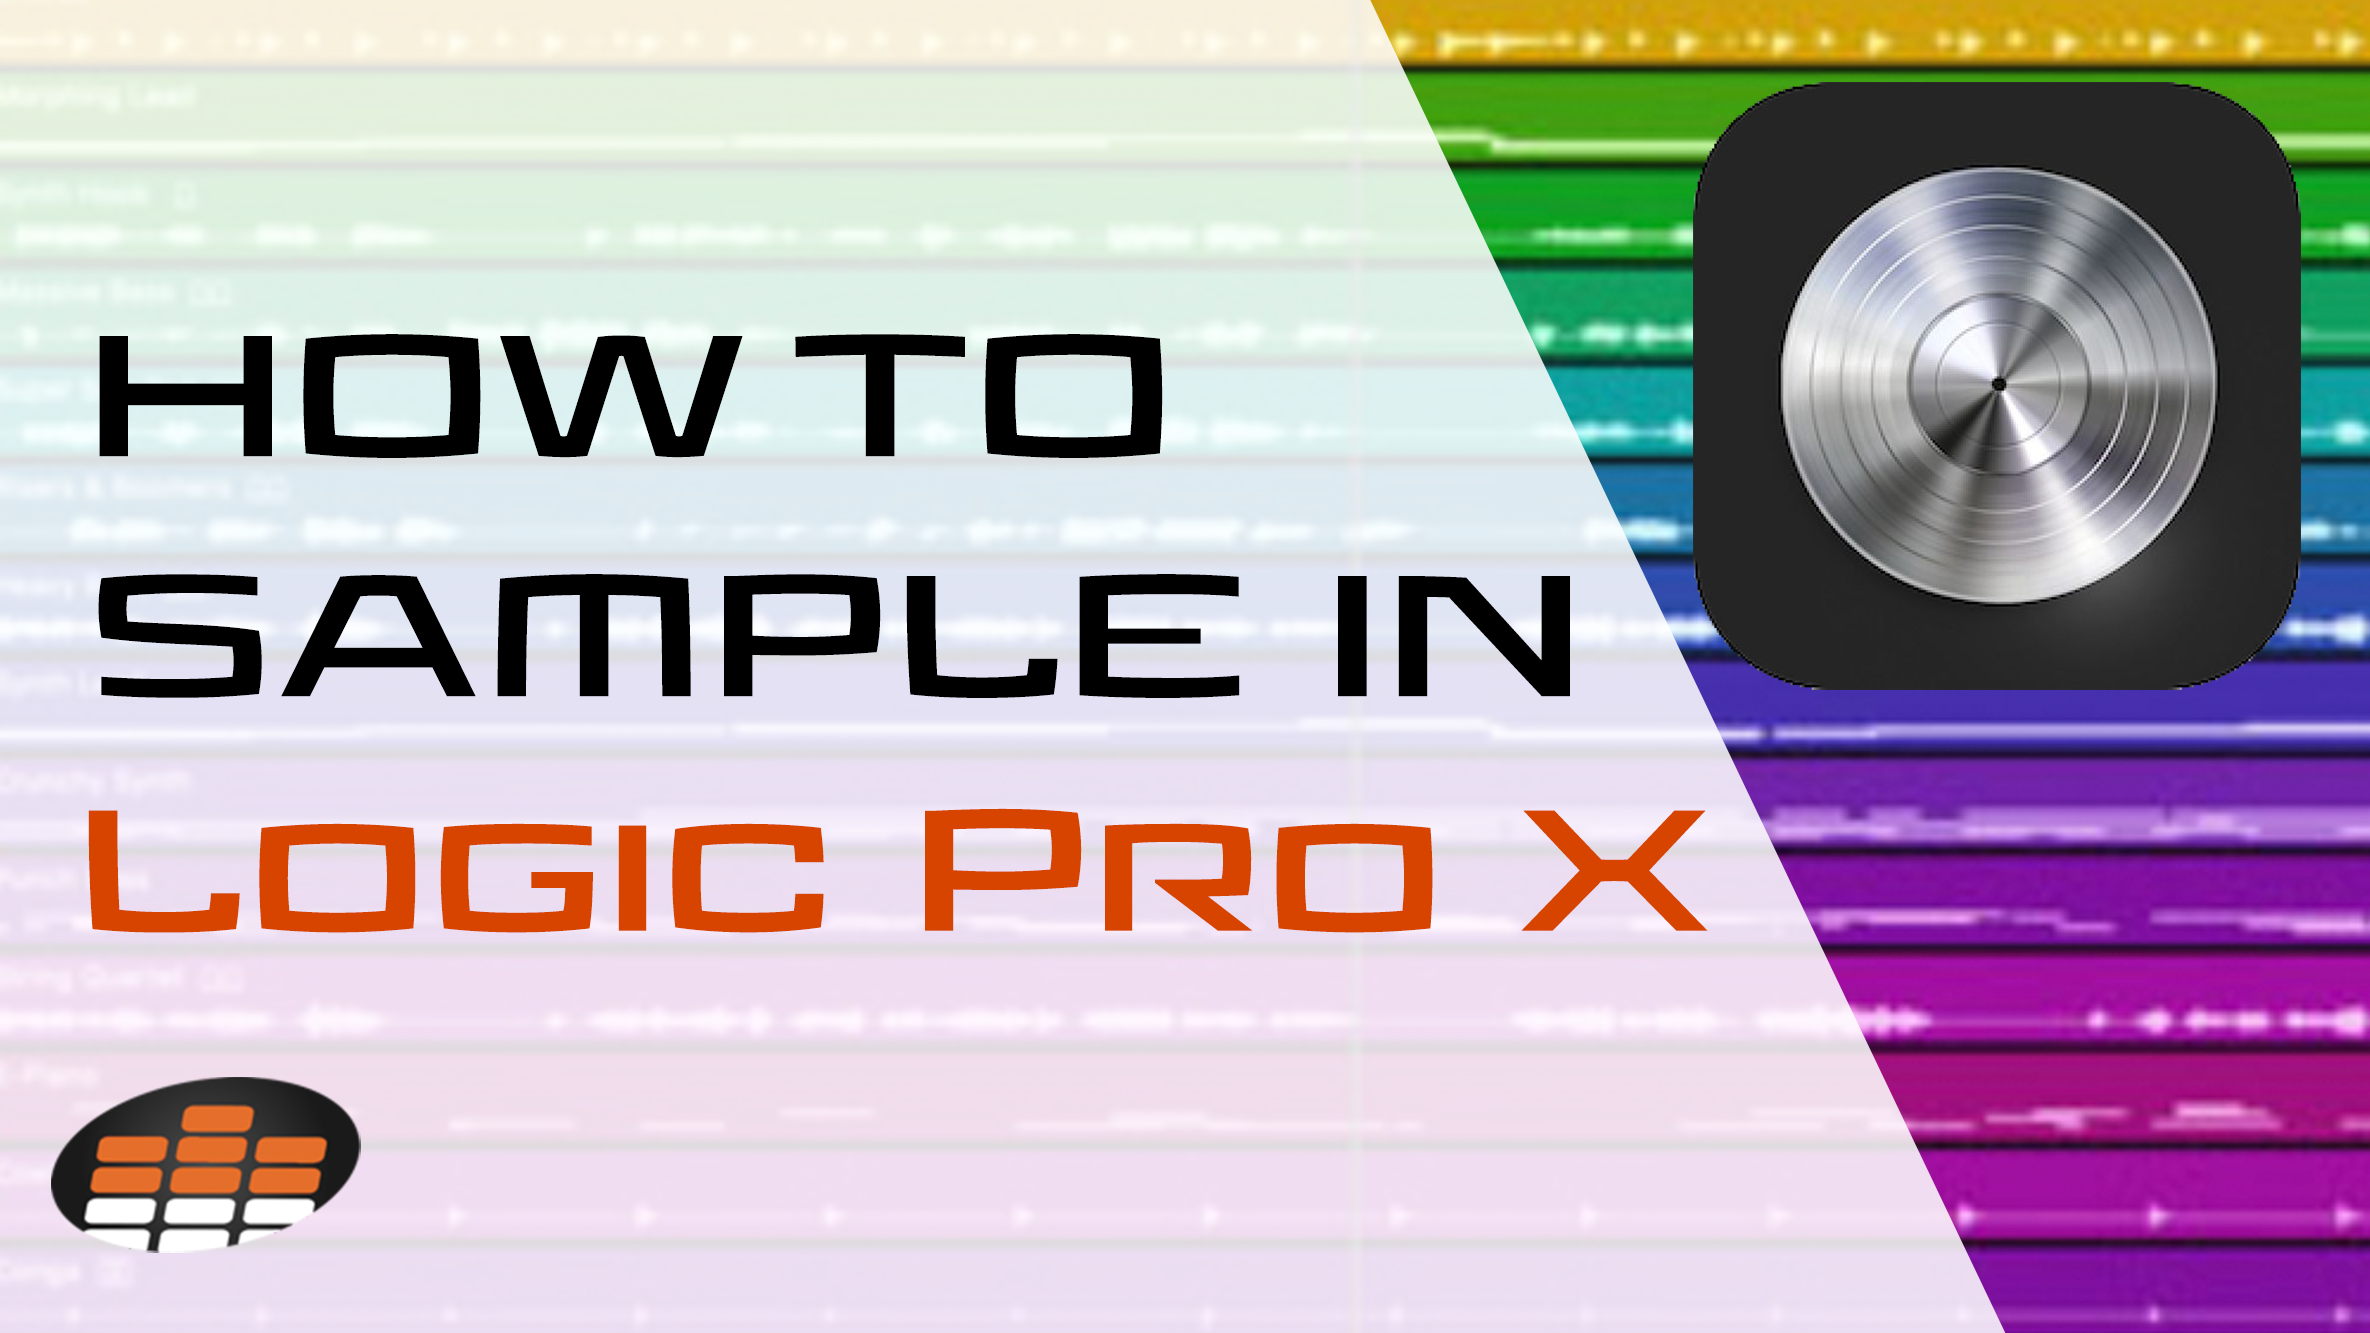 How To Sample In Logic Pro X (4 Tips To Get Started)